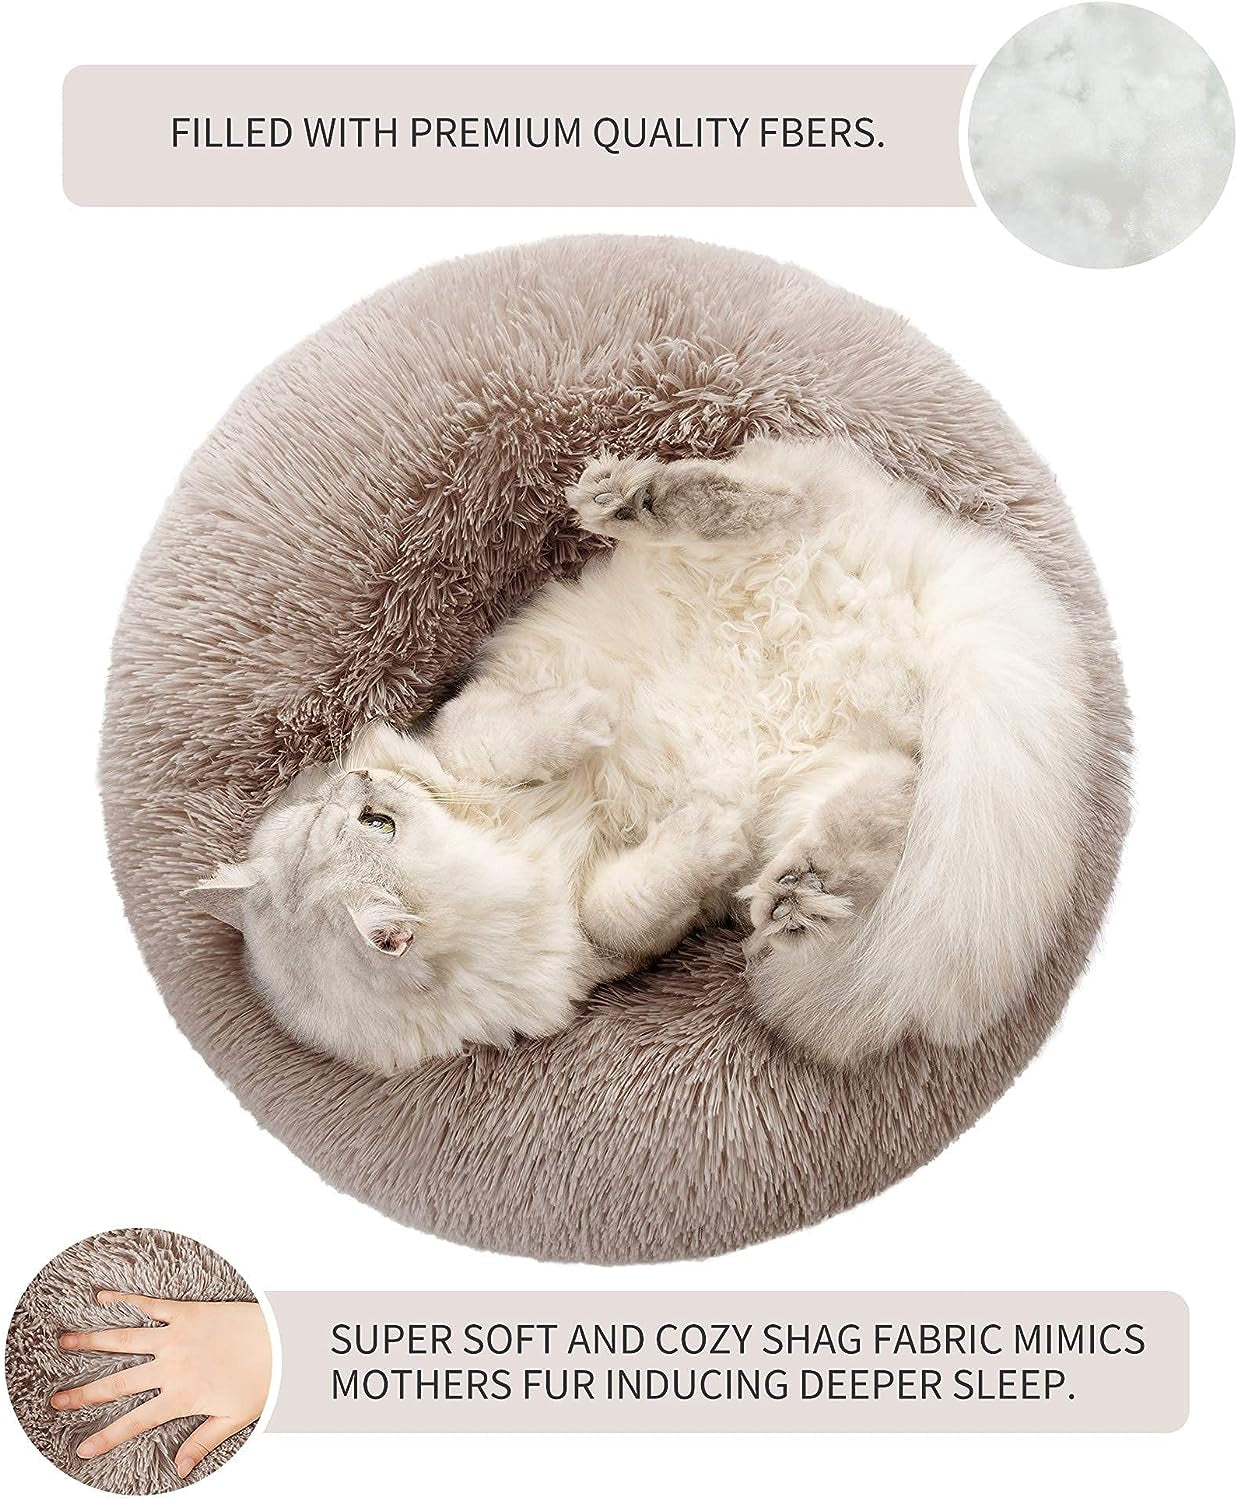 27In Cat Beds for Indoor Cats - Cat Bed with Machine Washable, Waterproof Bottom - Taupe Fluffy Dog and Cat Calming Cushion Bed for Joint-Relief and Sleep Improvement